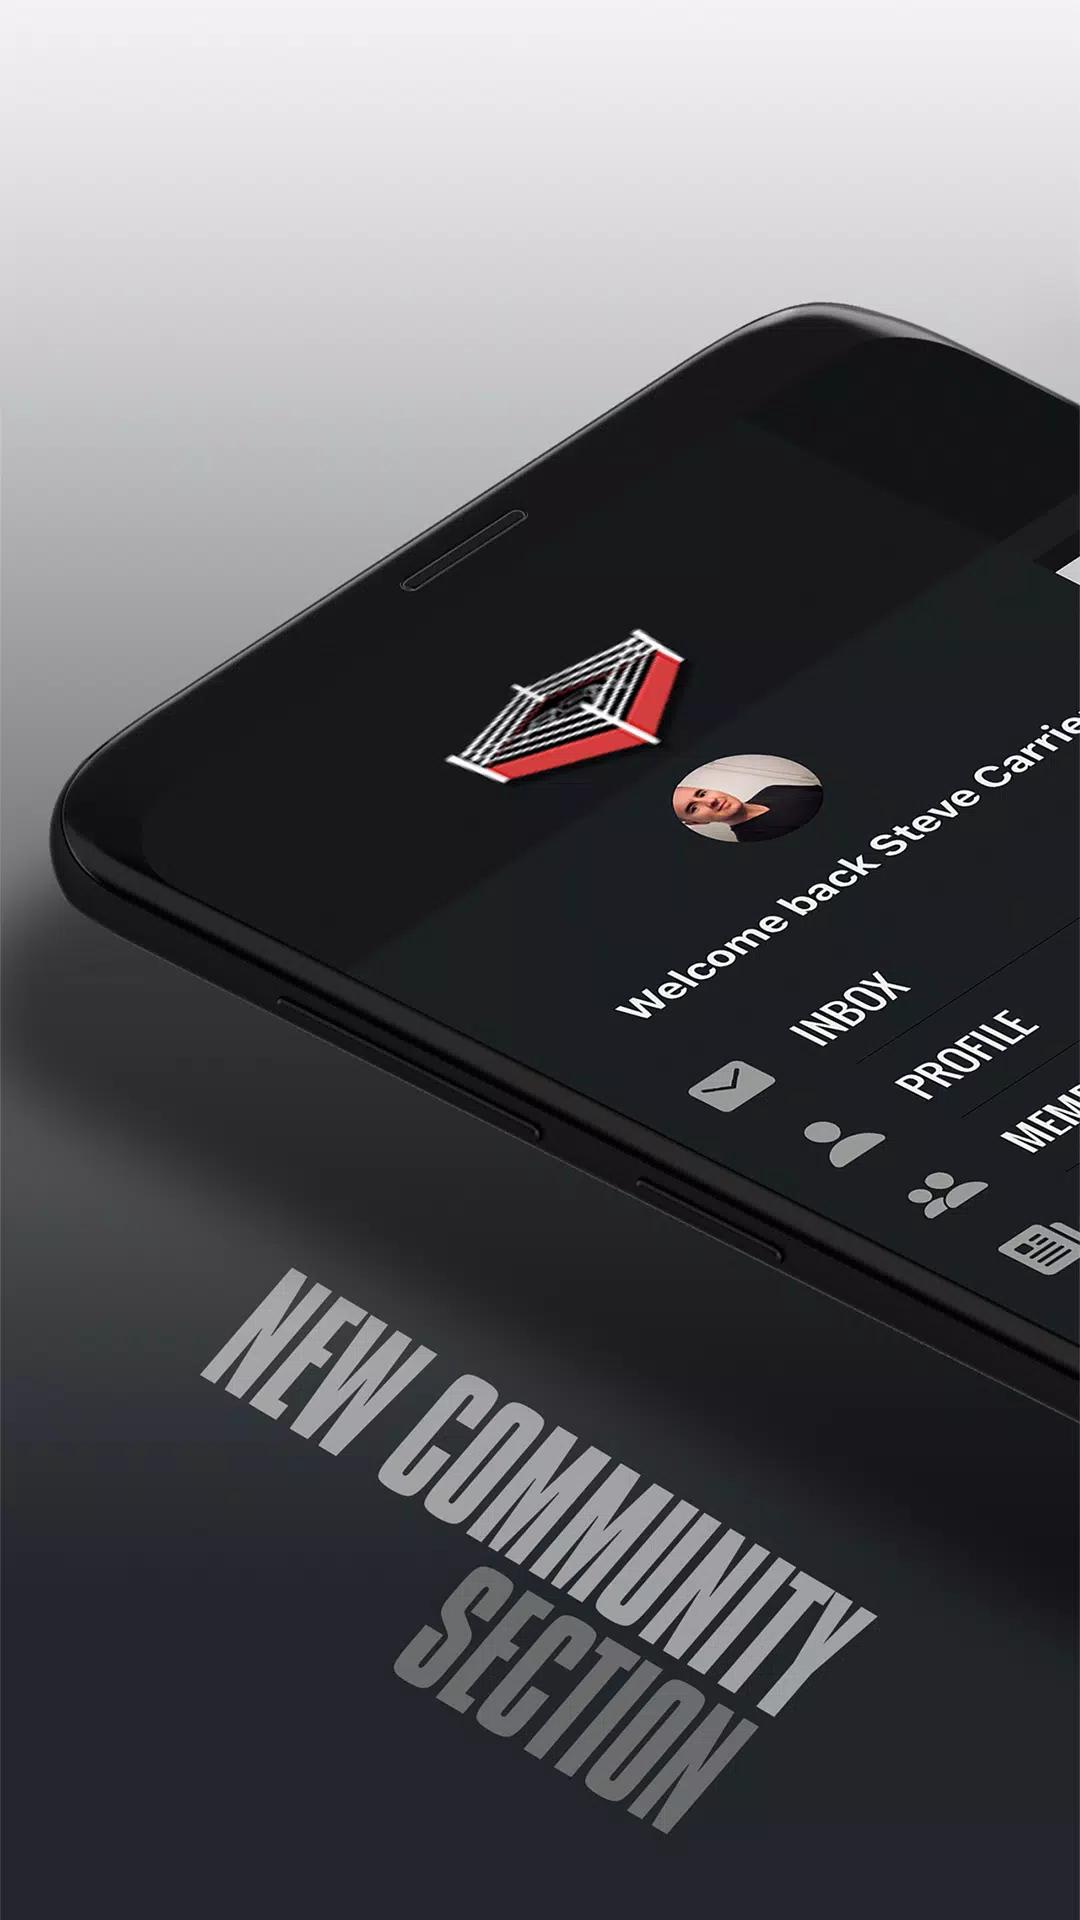 Ringside News for Android - APK Download